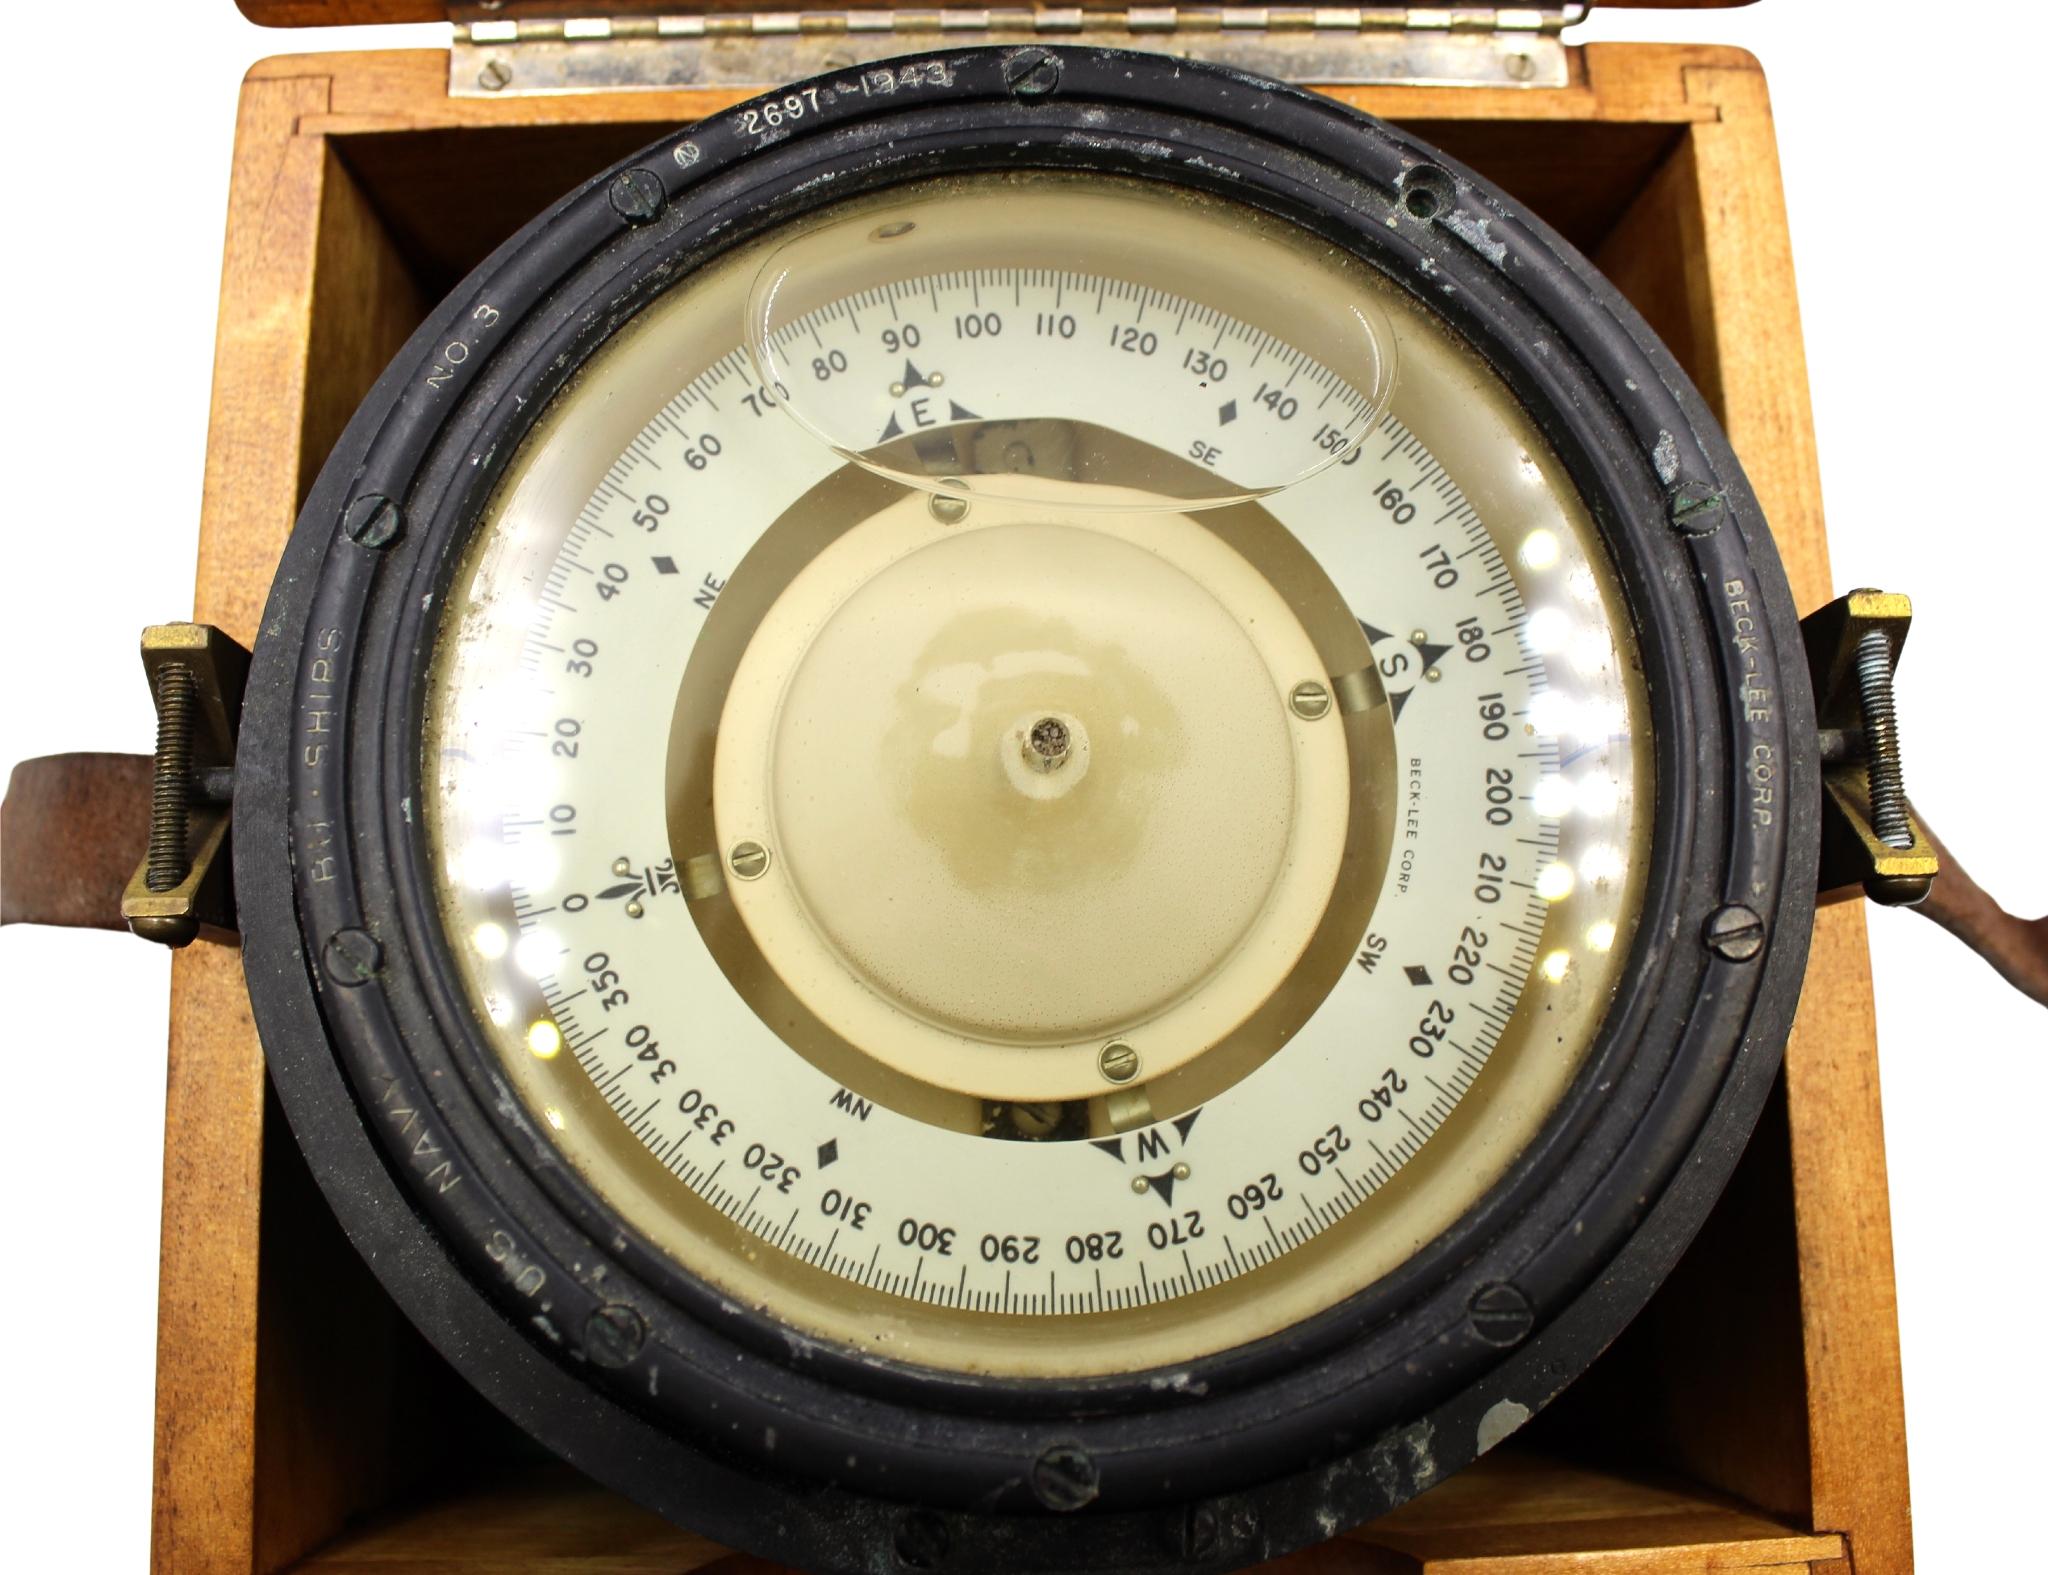 Presented is a U.S. Navy gimballed compass from 1943. The brass compass is beautifully constructed and fitted in a wooden lidded box with buckle. The compass is mounted on a 360-degree brass gimbal ring system. The gimbal ring design allows the